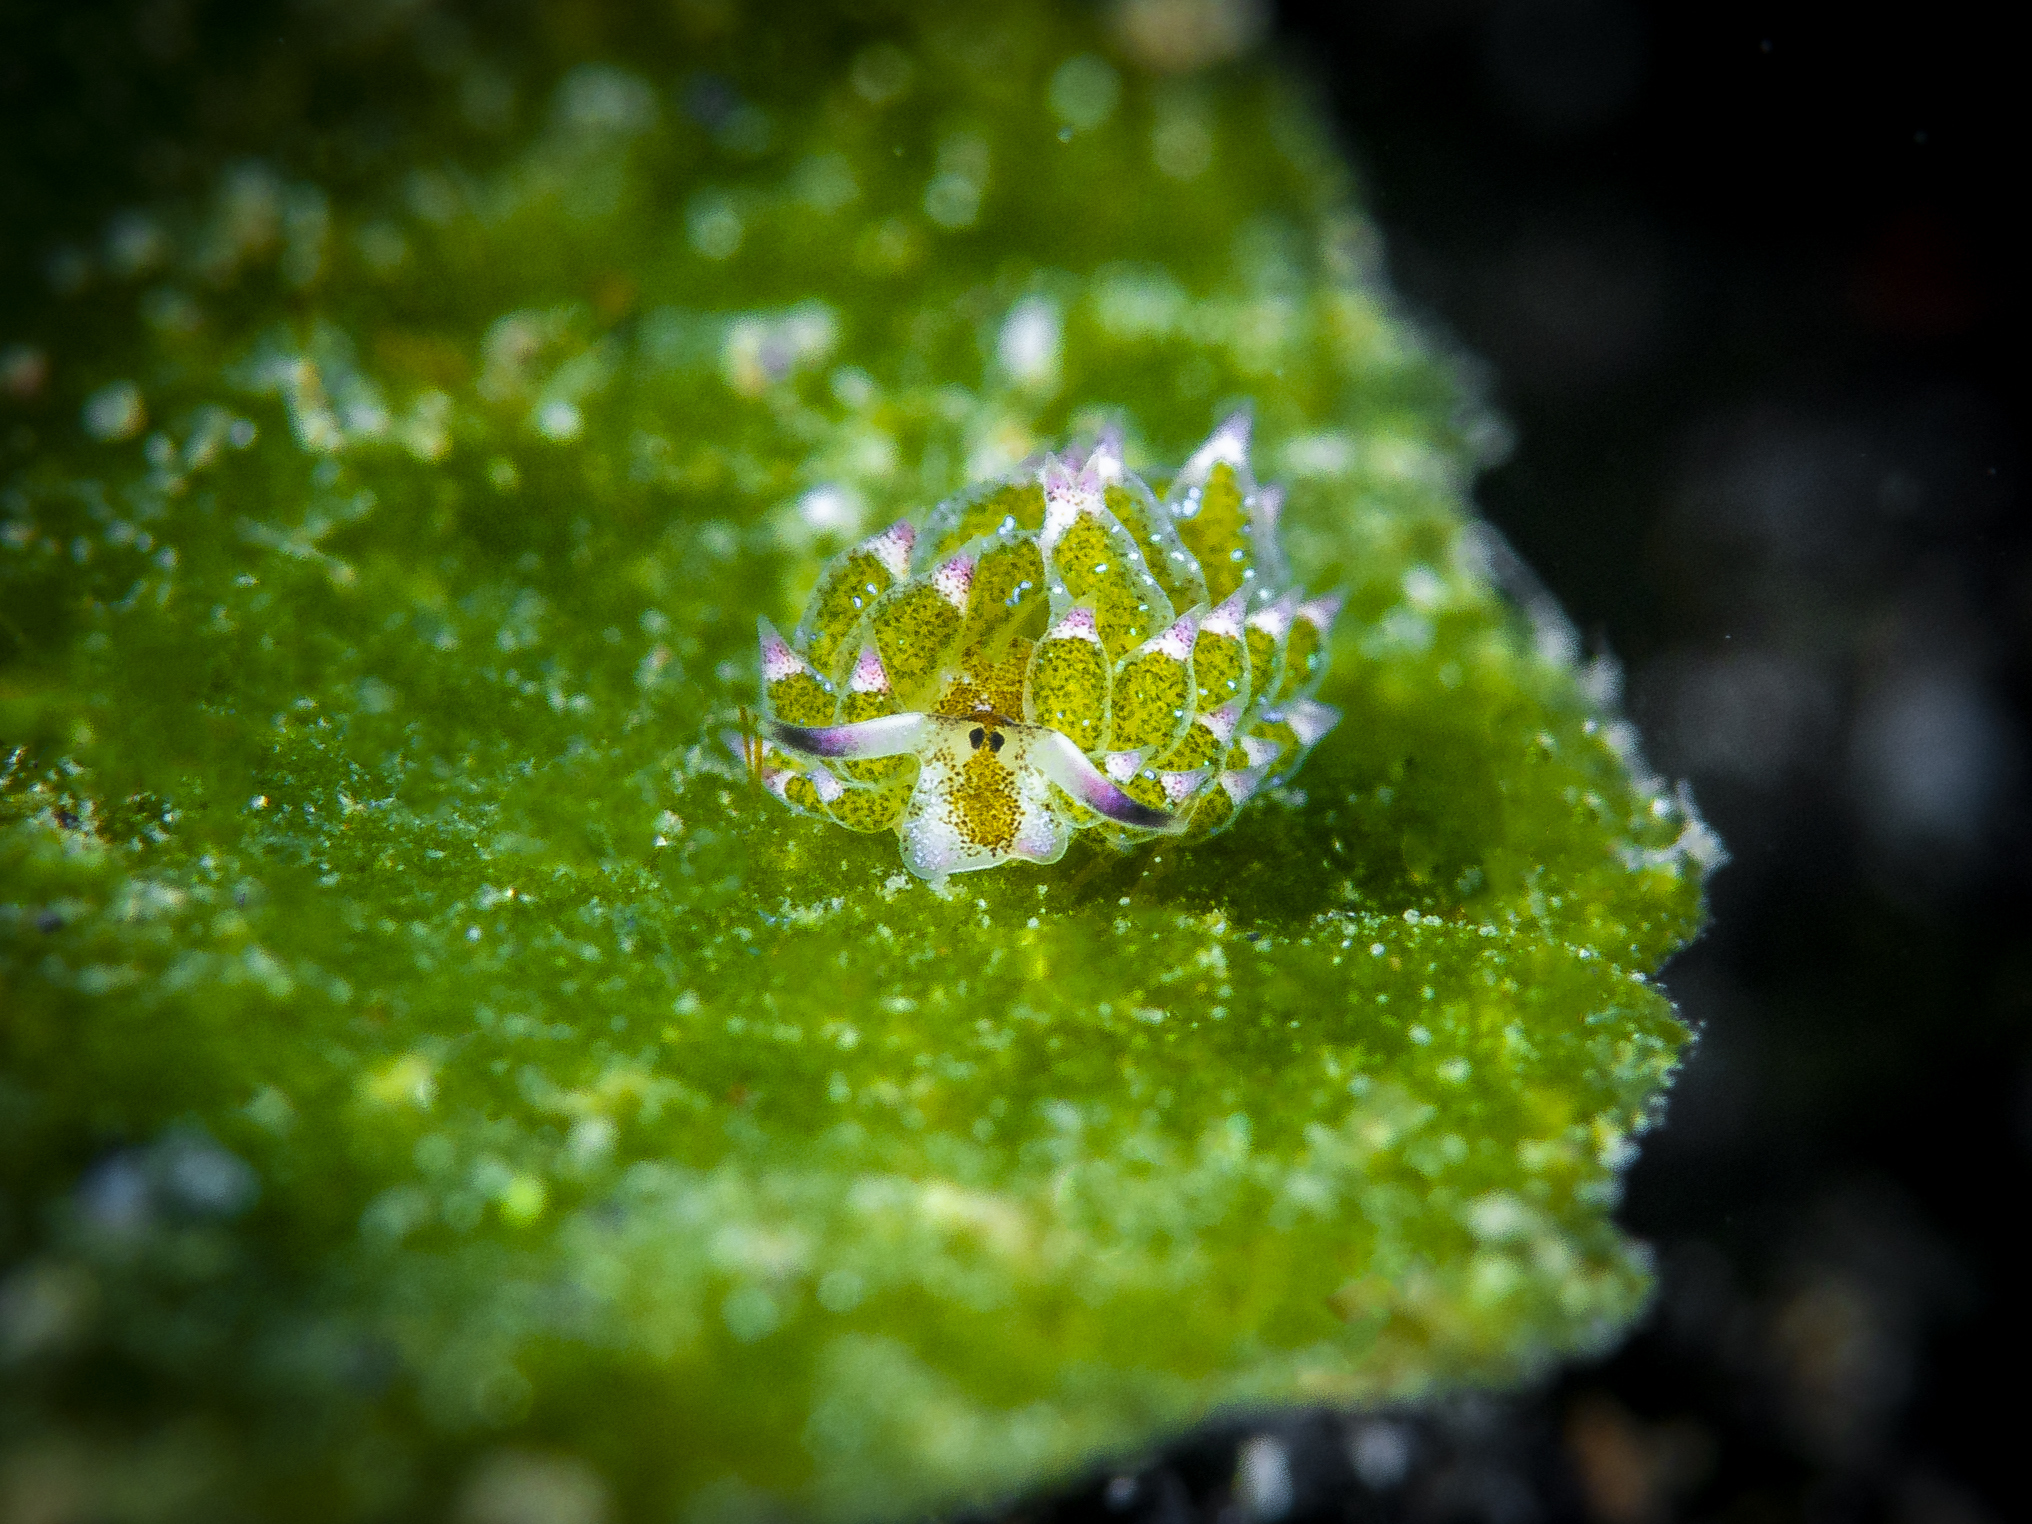 A small, green sea slug rests on a piece of alga. It has green lobes protruding from its body and tiny black eyes.